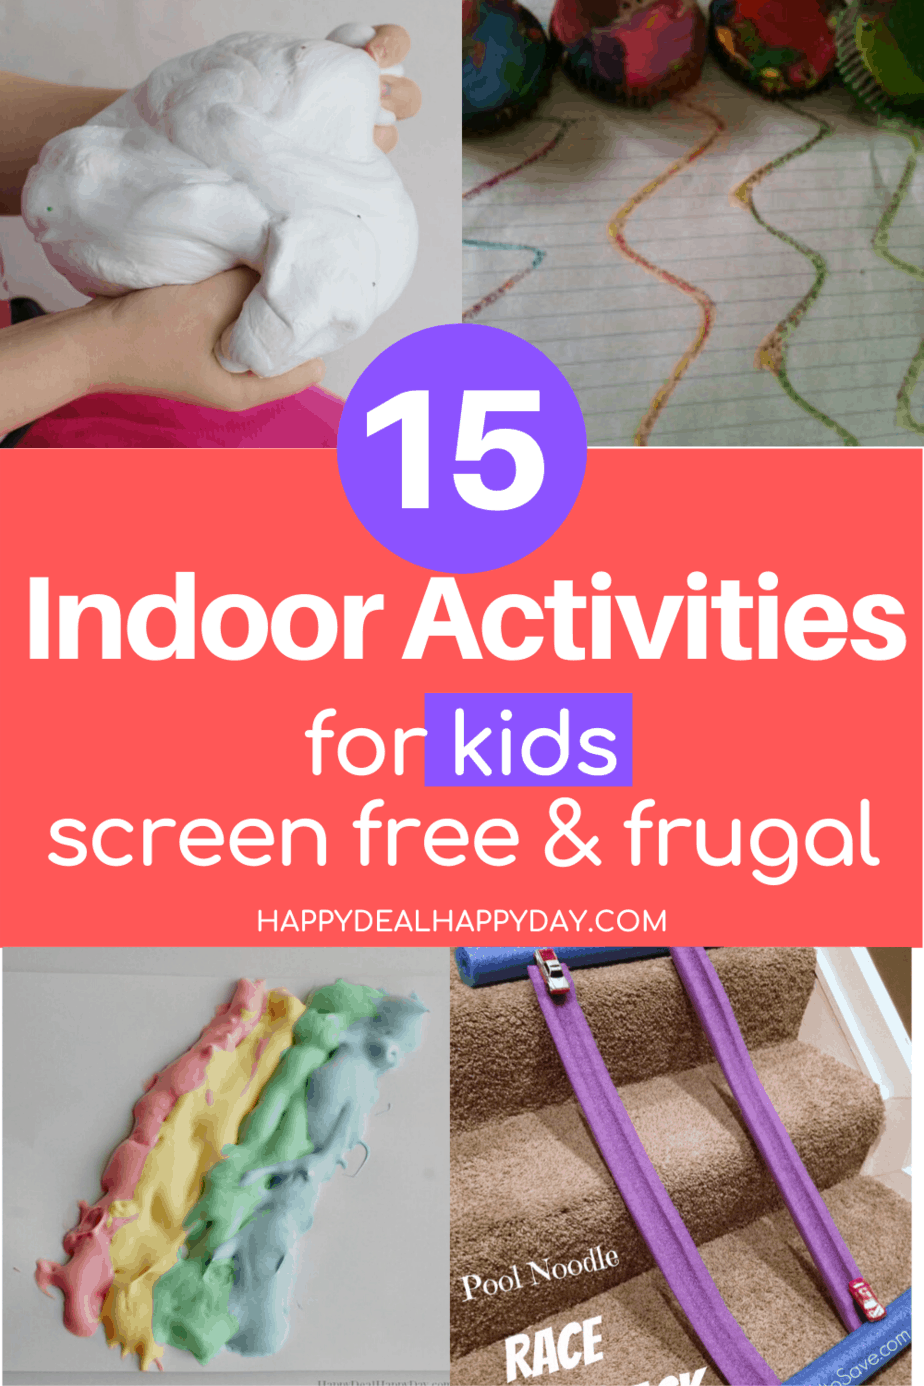 15 Indoor Activities For Kids That Are Screen Free And Frugal 1